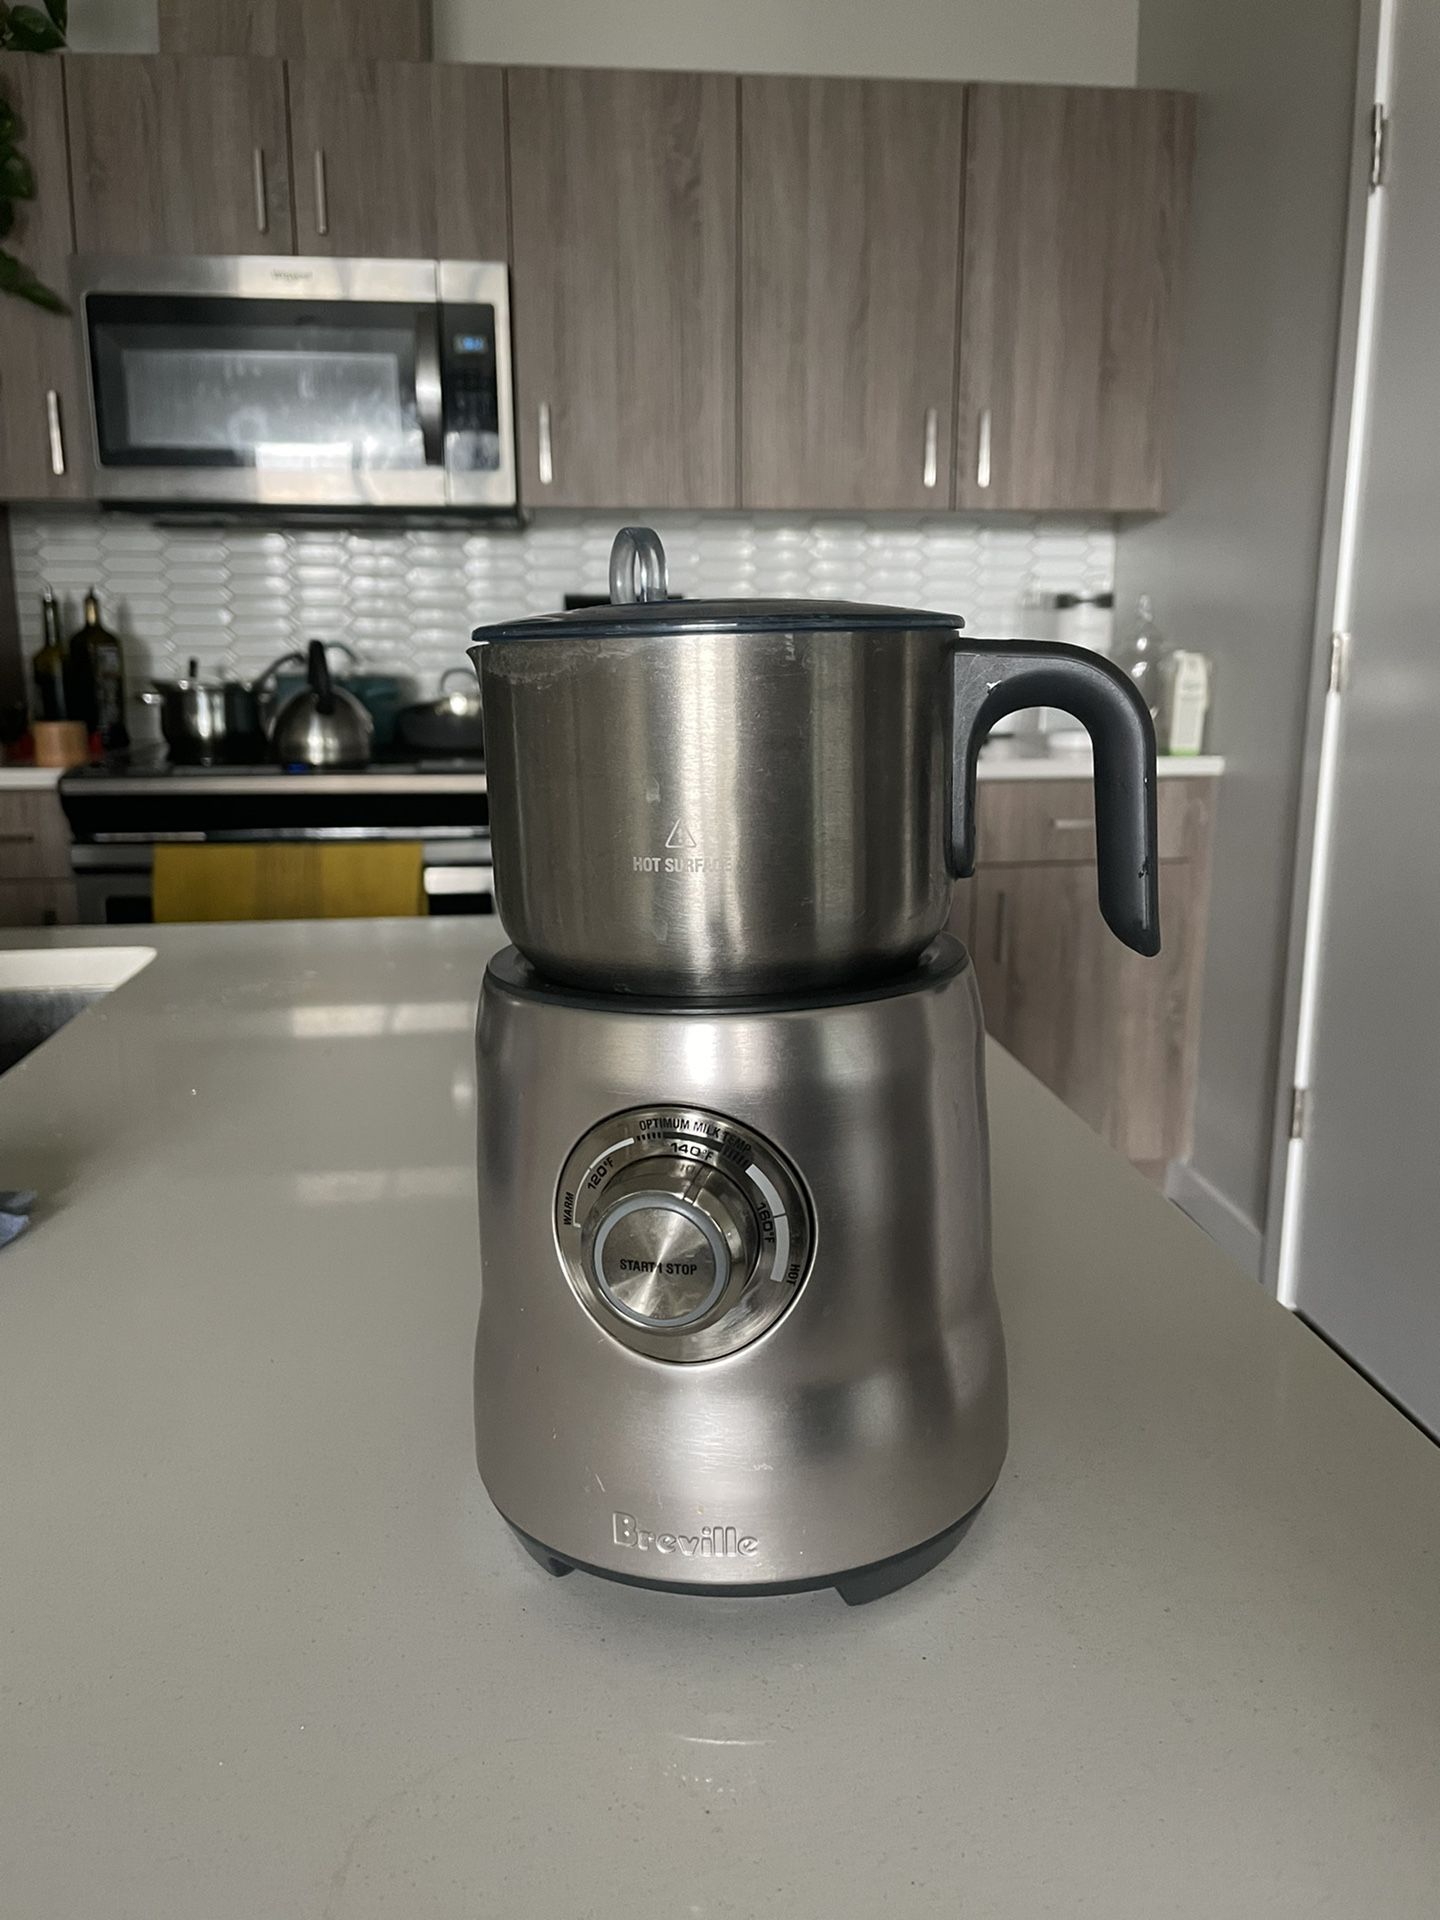 Breville Milk Cafe Frother for Sale in Bothell, WA - OfferUp